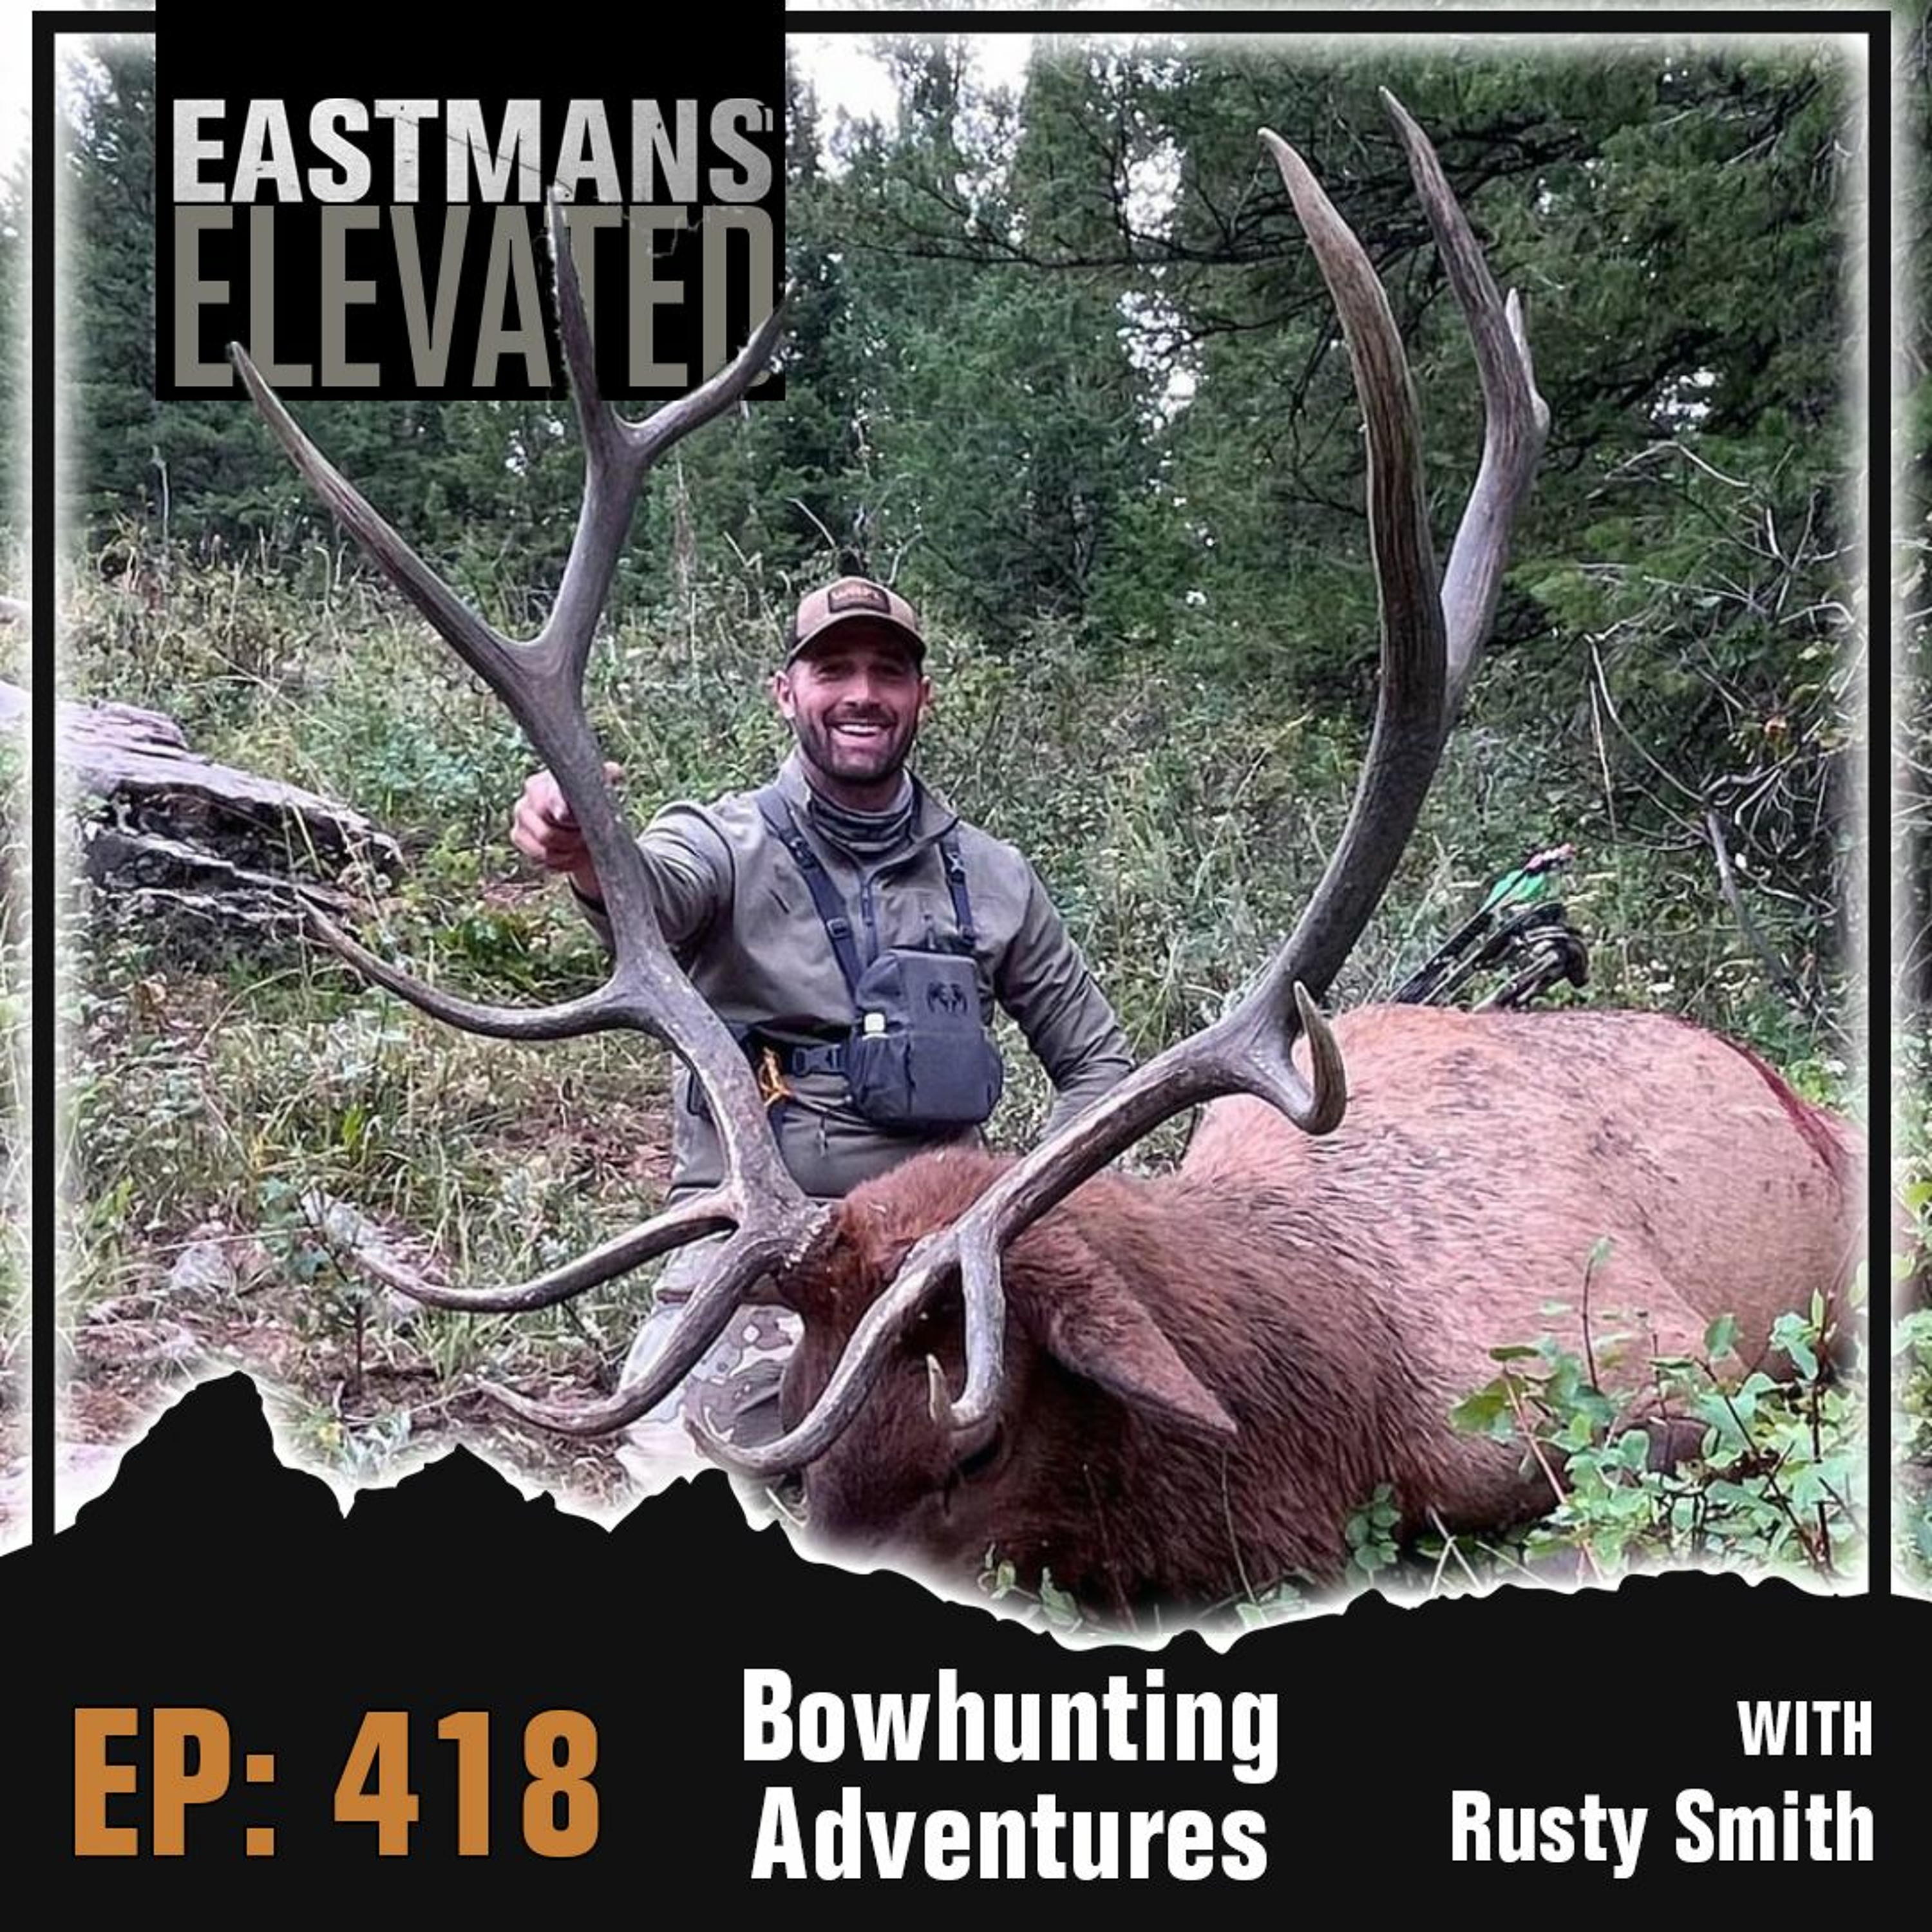 Episode 418:  Bowhunting Adventures With Rusty Smith